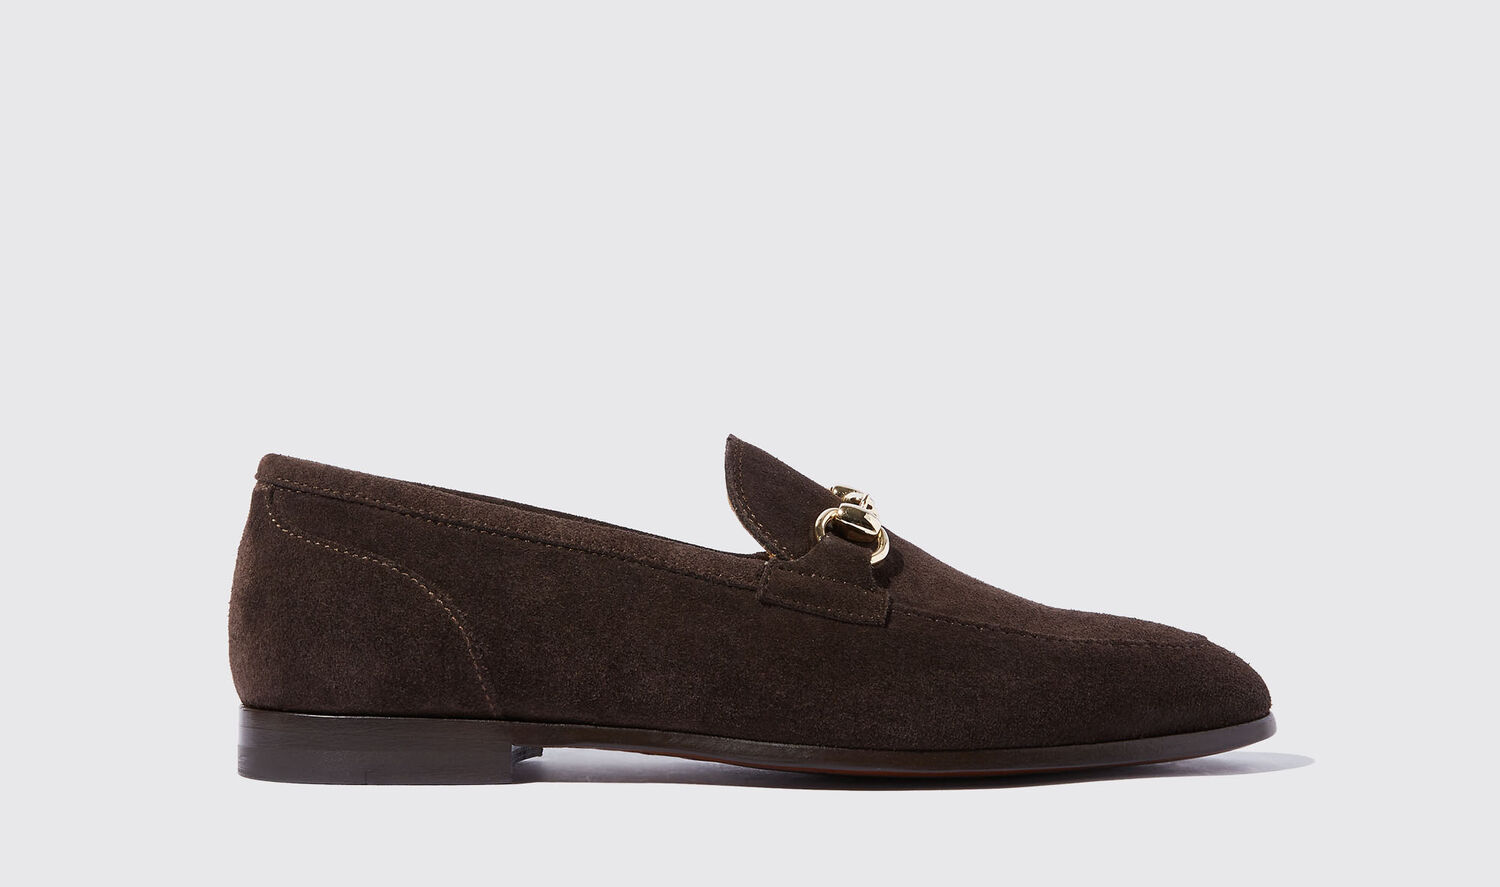 Scarosso Loafers Alessandra Moro Scamosciata Suede Leather In Brown - Suede